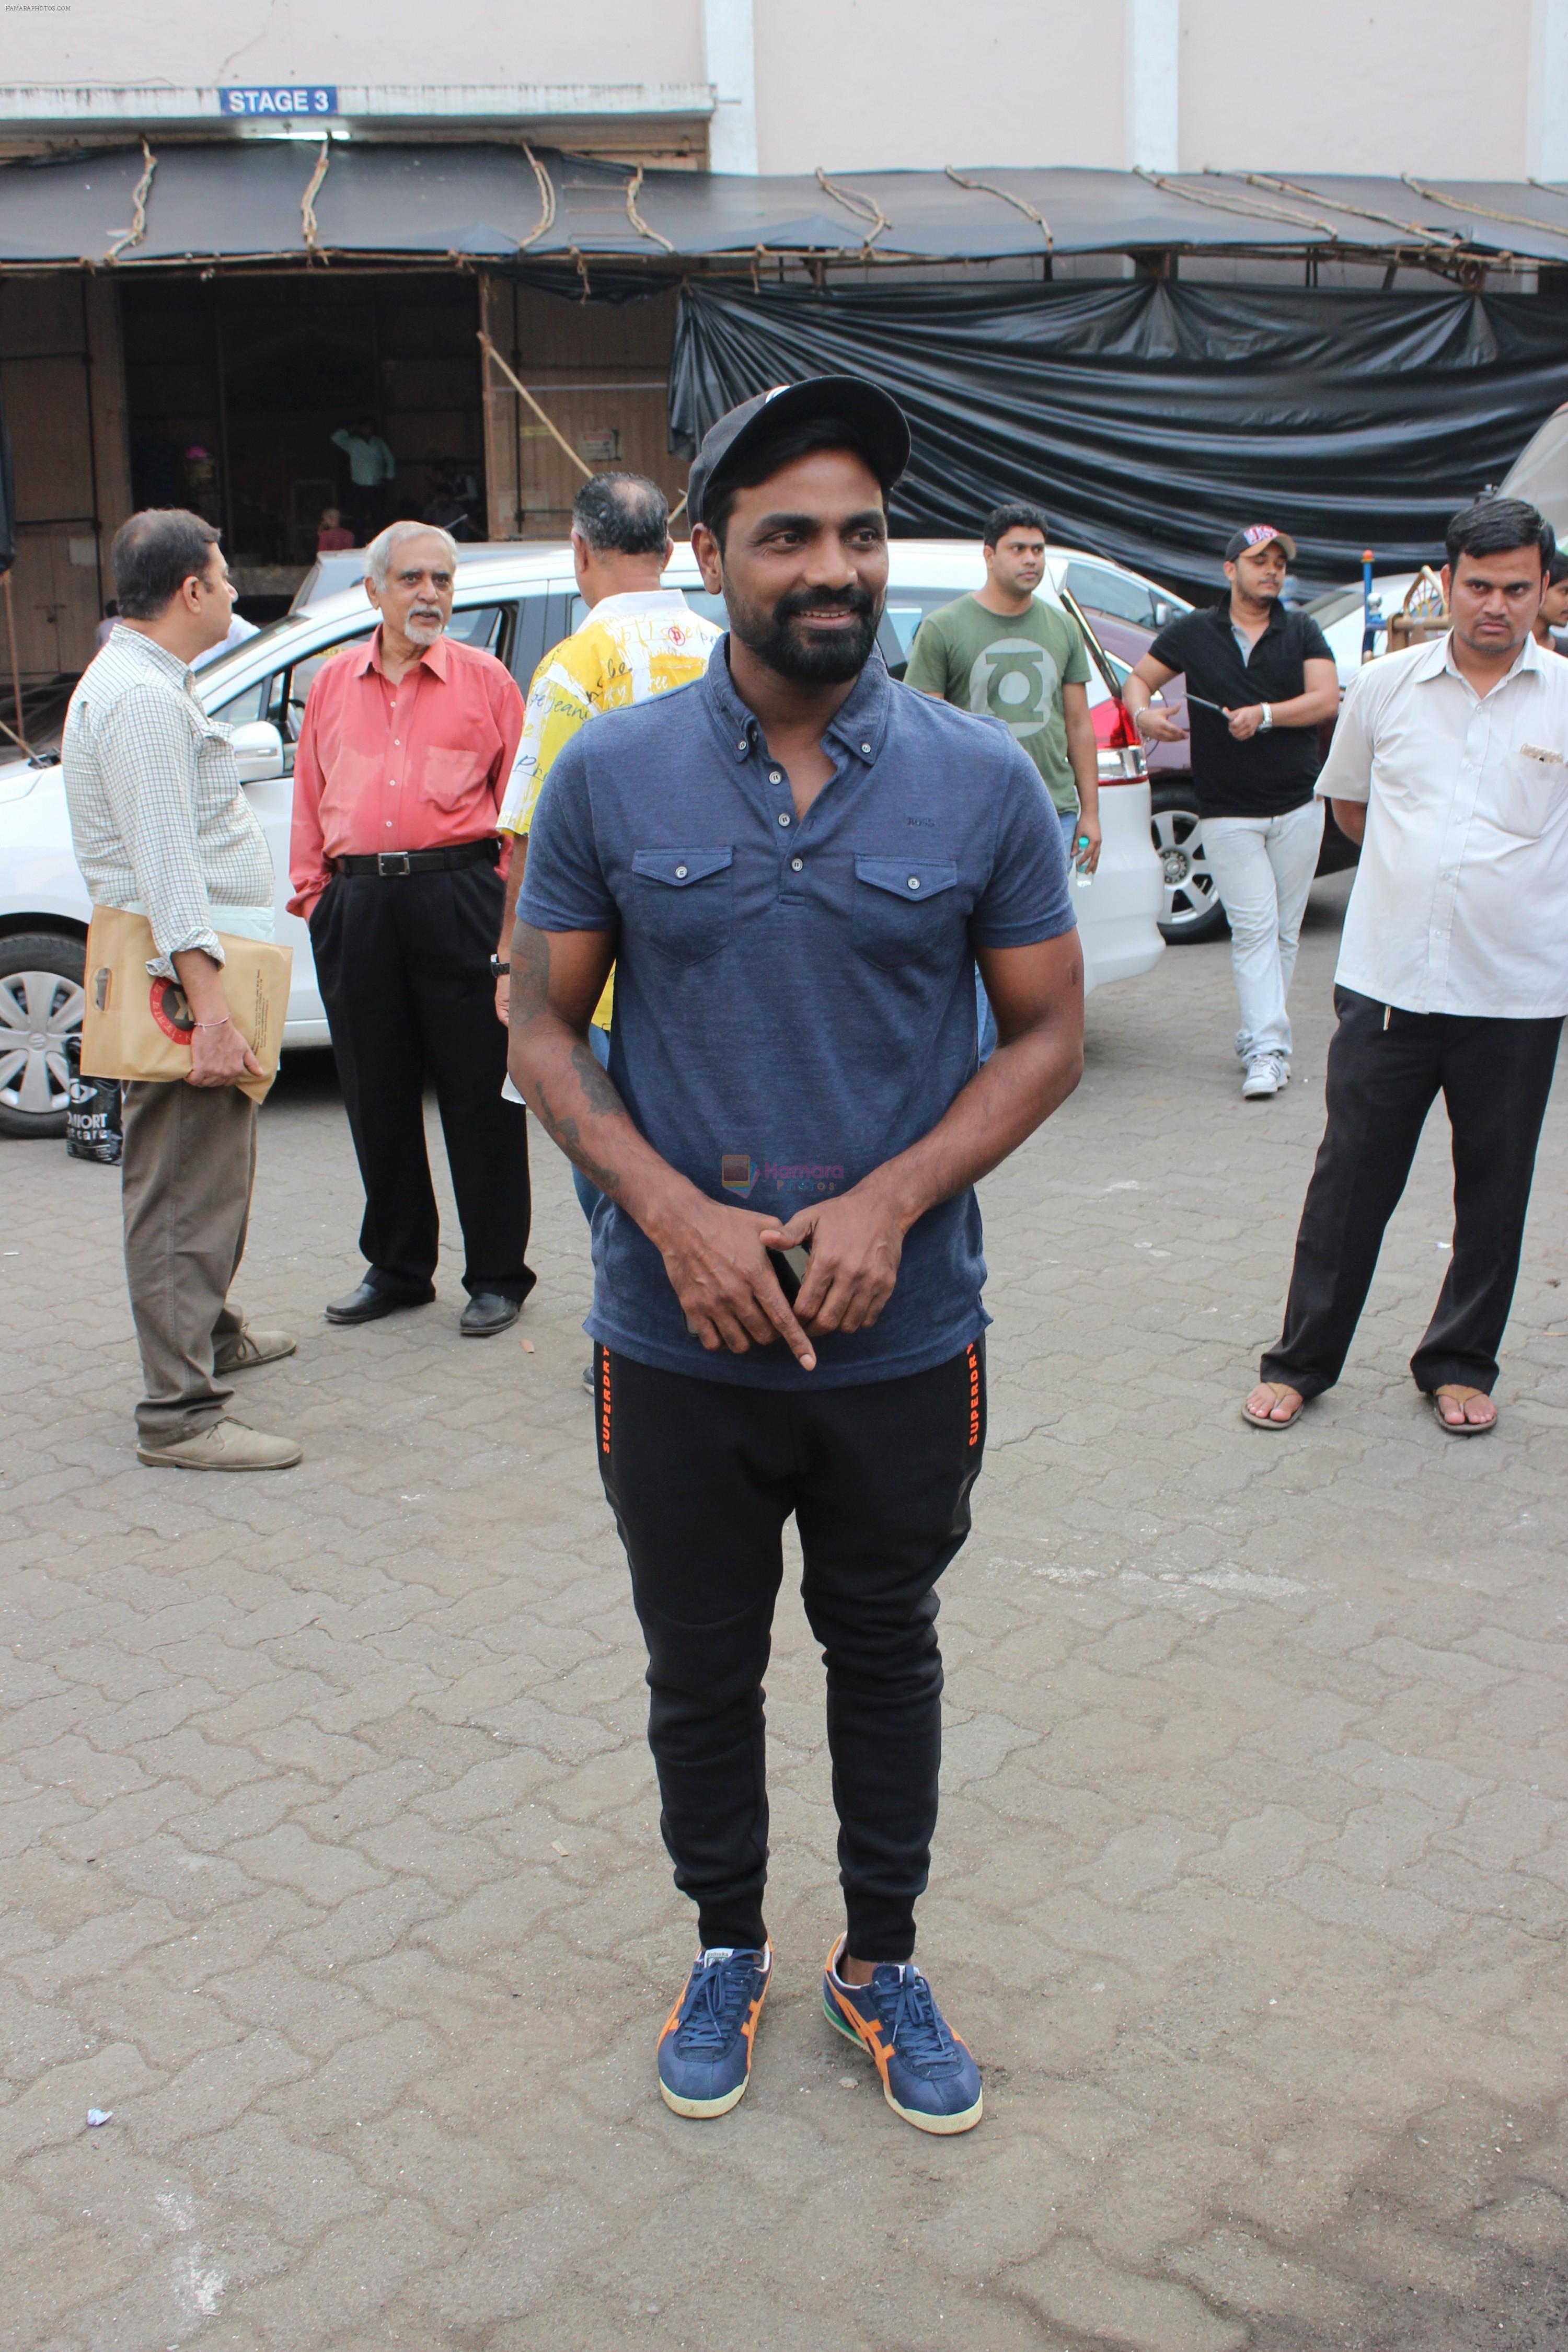 Remo D Souza snapped at Mehboob on 13th June 2017